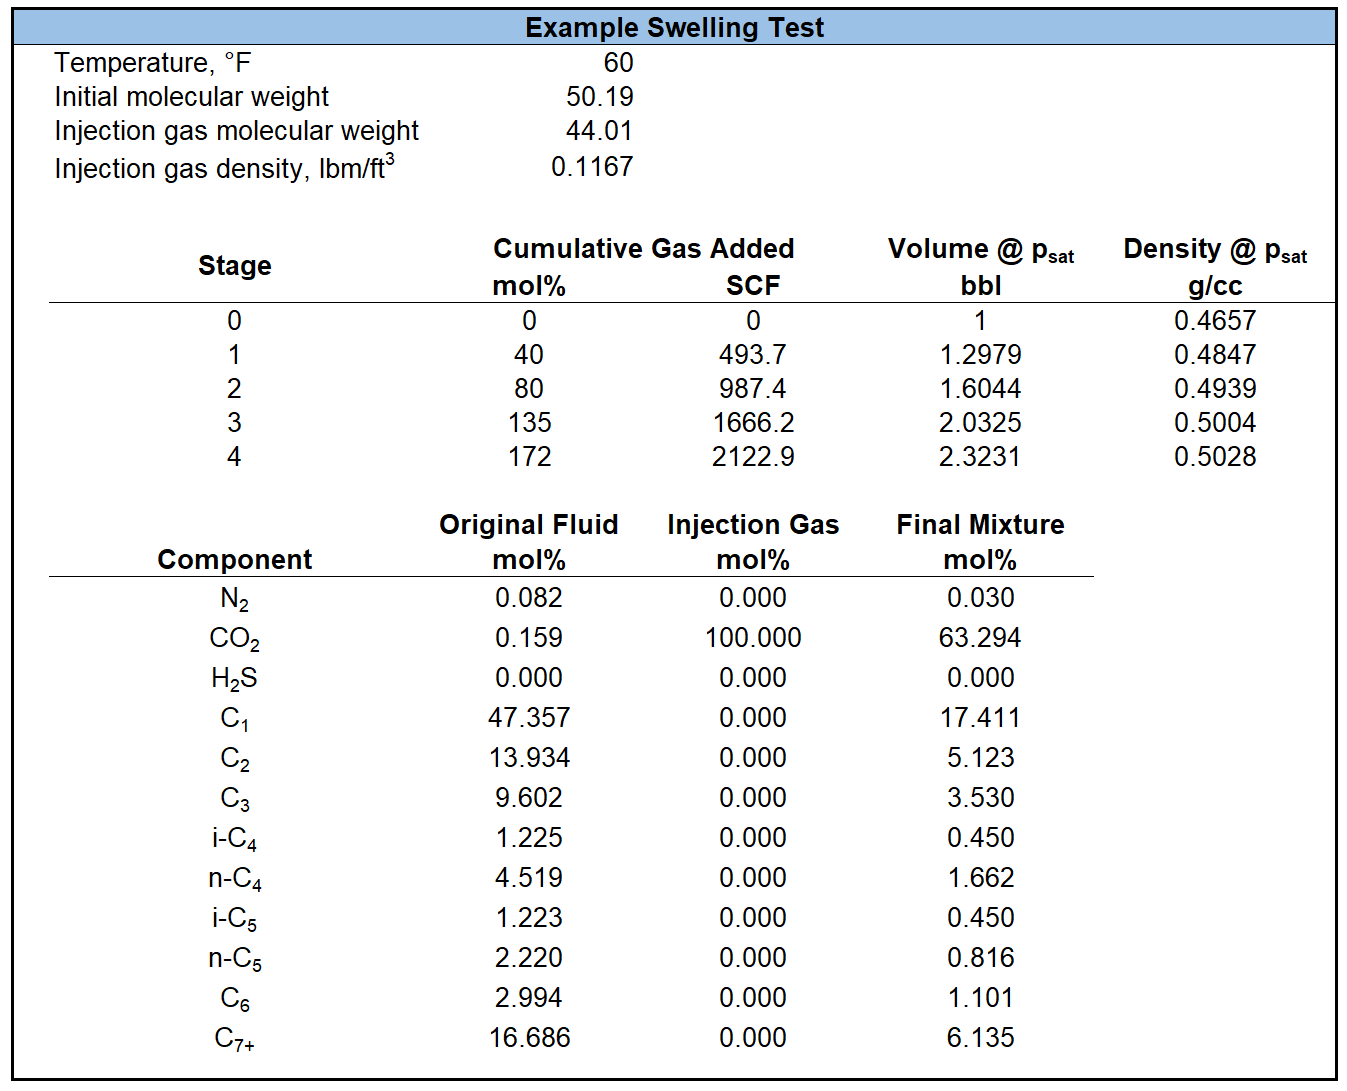 Example figure of swell test data